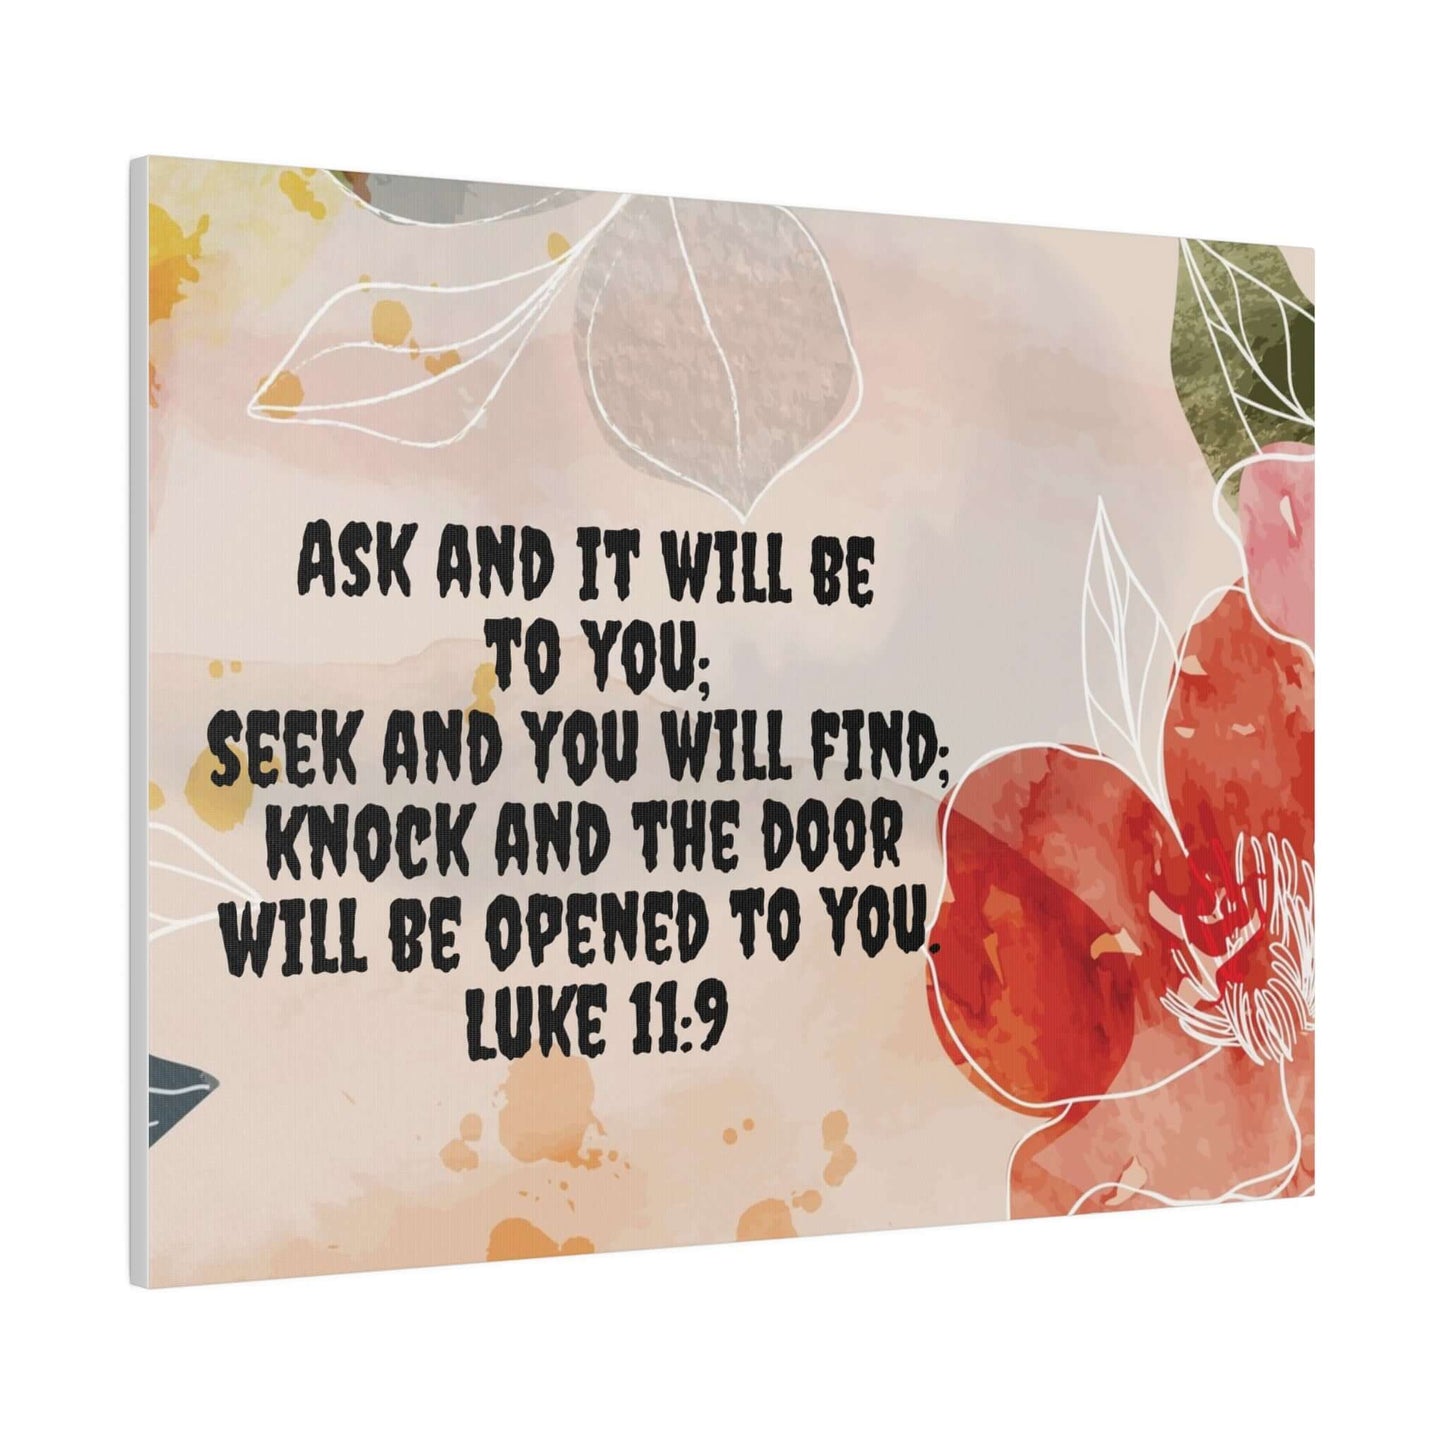 Floral Canvas Wall Art with Luke 11:9 - Eco-Friendly and Vibrant Unframed Art | Art & Wall Decor,Canvas,Decor,Eco-friendly,Hanging Hardware,Holiday Picks,Home & Living,Indoor,Matte,Seasonal Picks,Sustainable,Wall,Wood